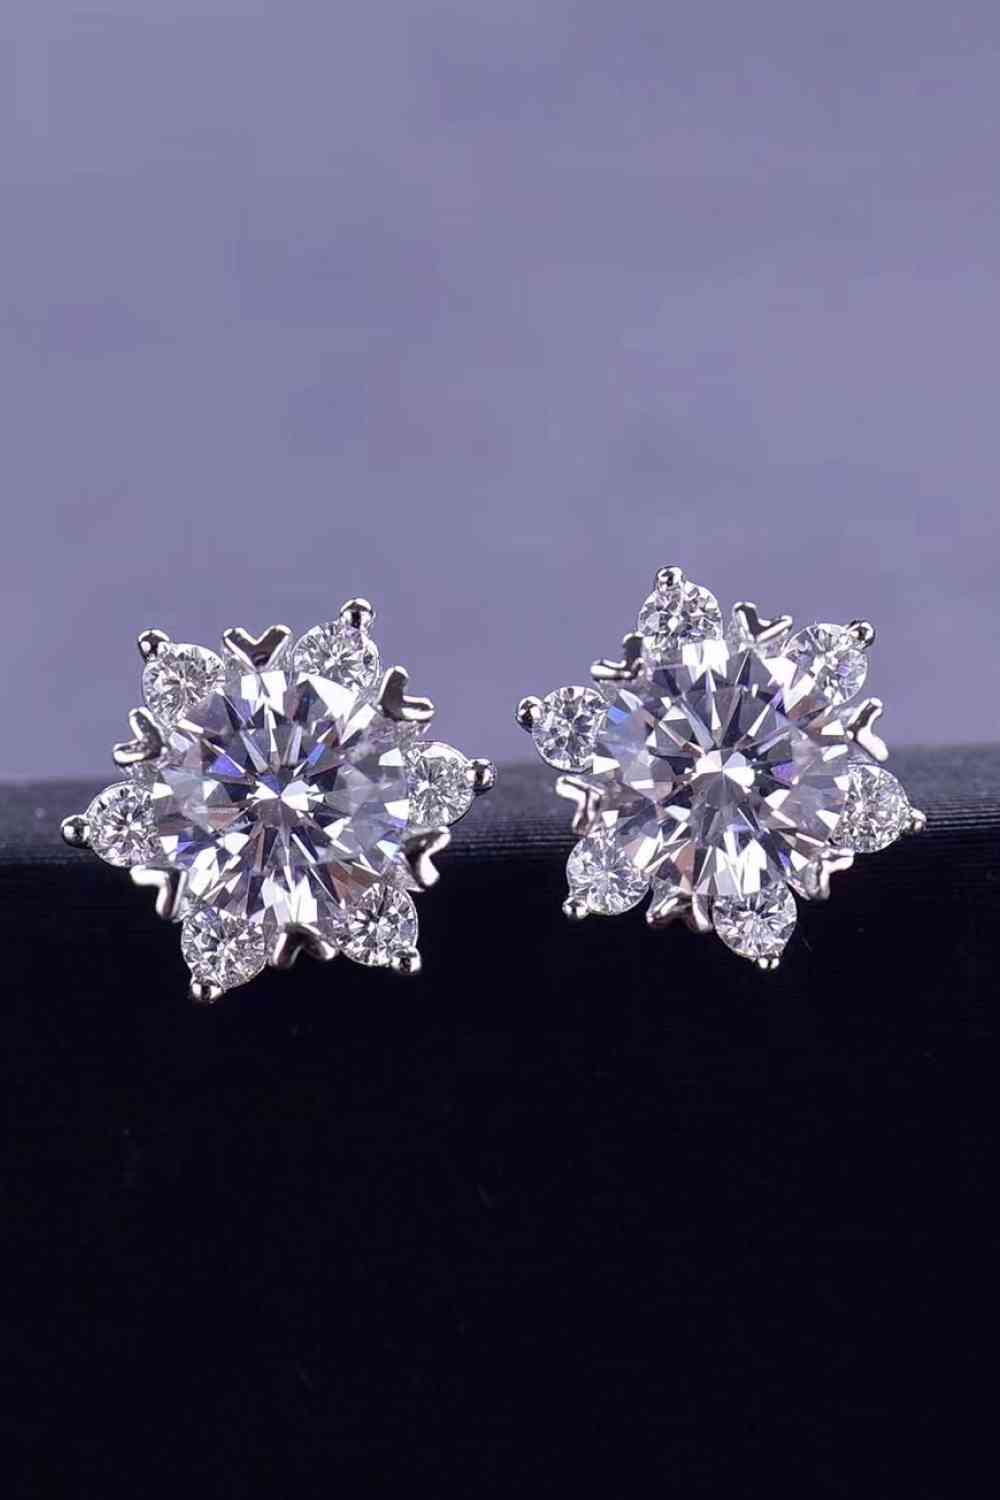 2 Carat Moissanite Floral Stud Earrings - Kawaii Stop - 2 Carat Moissanite, Bright, Certificate of Stone Properties, Christmas, Elegant Design, Everyday Glamour, Fashionable Jewelry, Floral Stud Earrings, Limited Warranty, Luxury Accessories, Minimalist Style, Modern Elegance, Moissanite Earrings, Platinum-Plated, Ship From Overseas, Sleek and Stylish, Sparkling Gemstones, Statement Earrings, Sterling Silver Jewelry